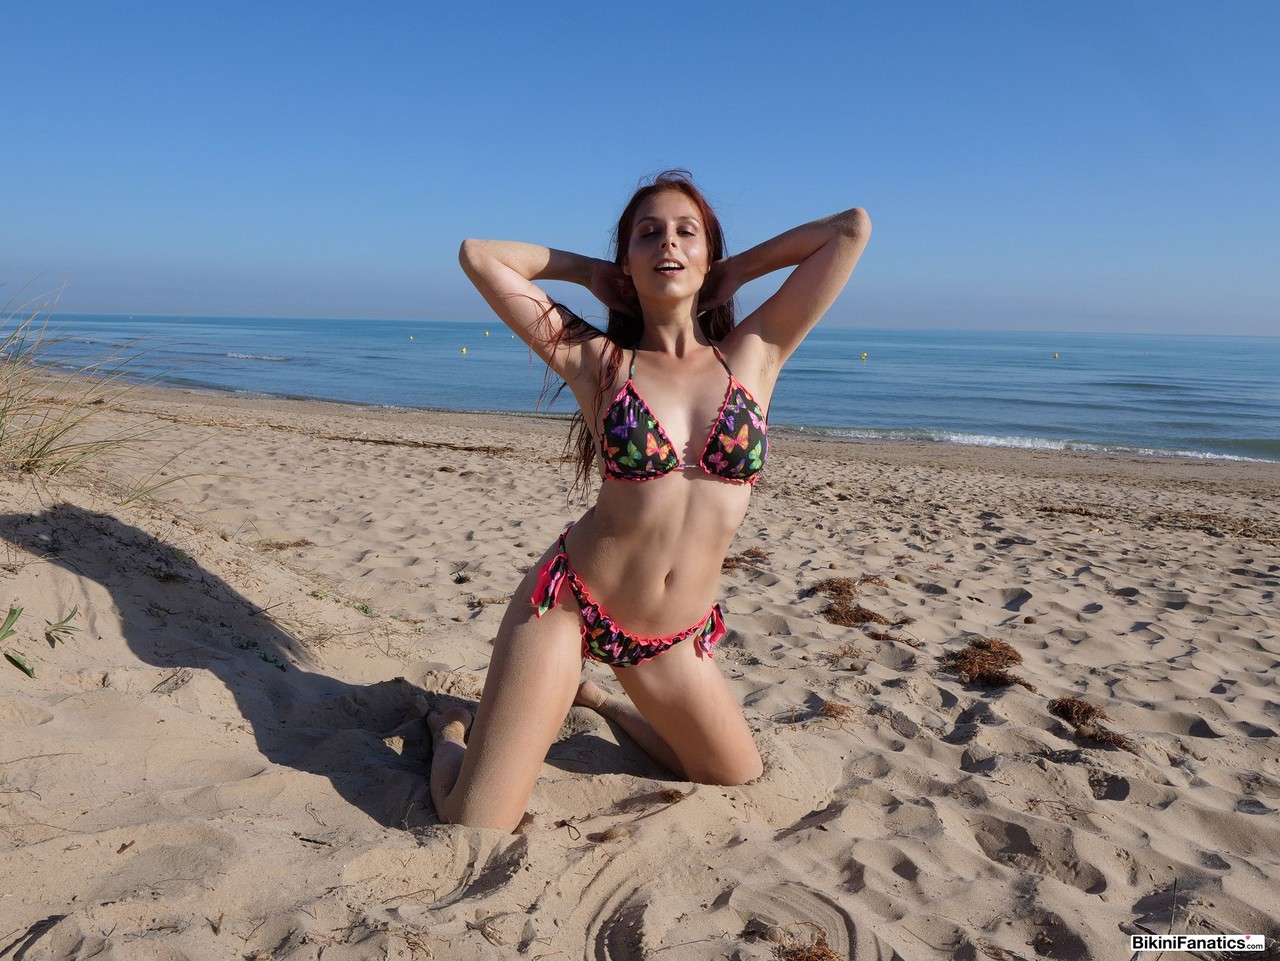 Antonia is back in action and today she is making some new, fun and sexy 色情照片 #429179534 | Bikini Fanatics Pics, Antonia, Beach, 手机色情